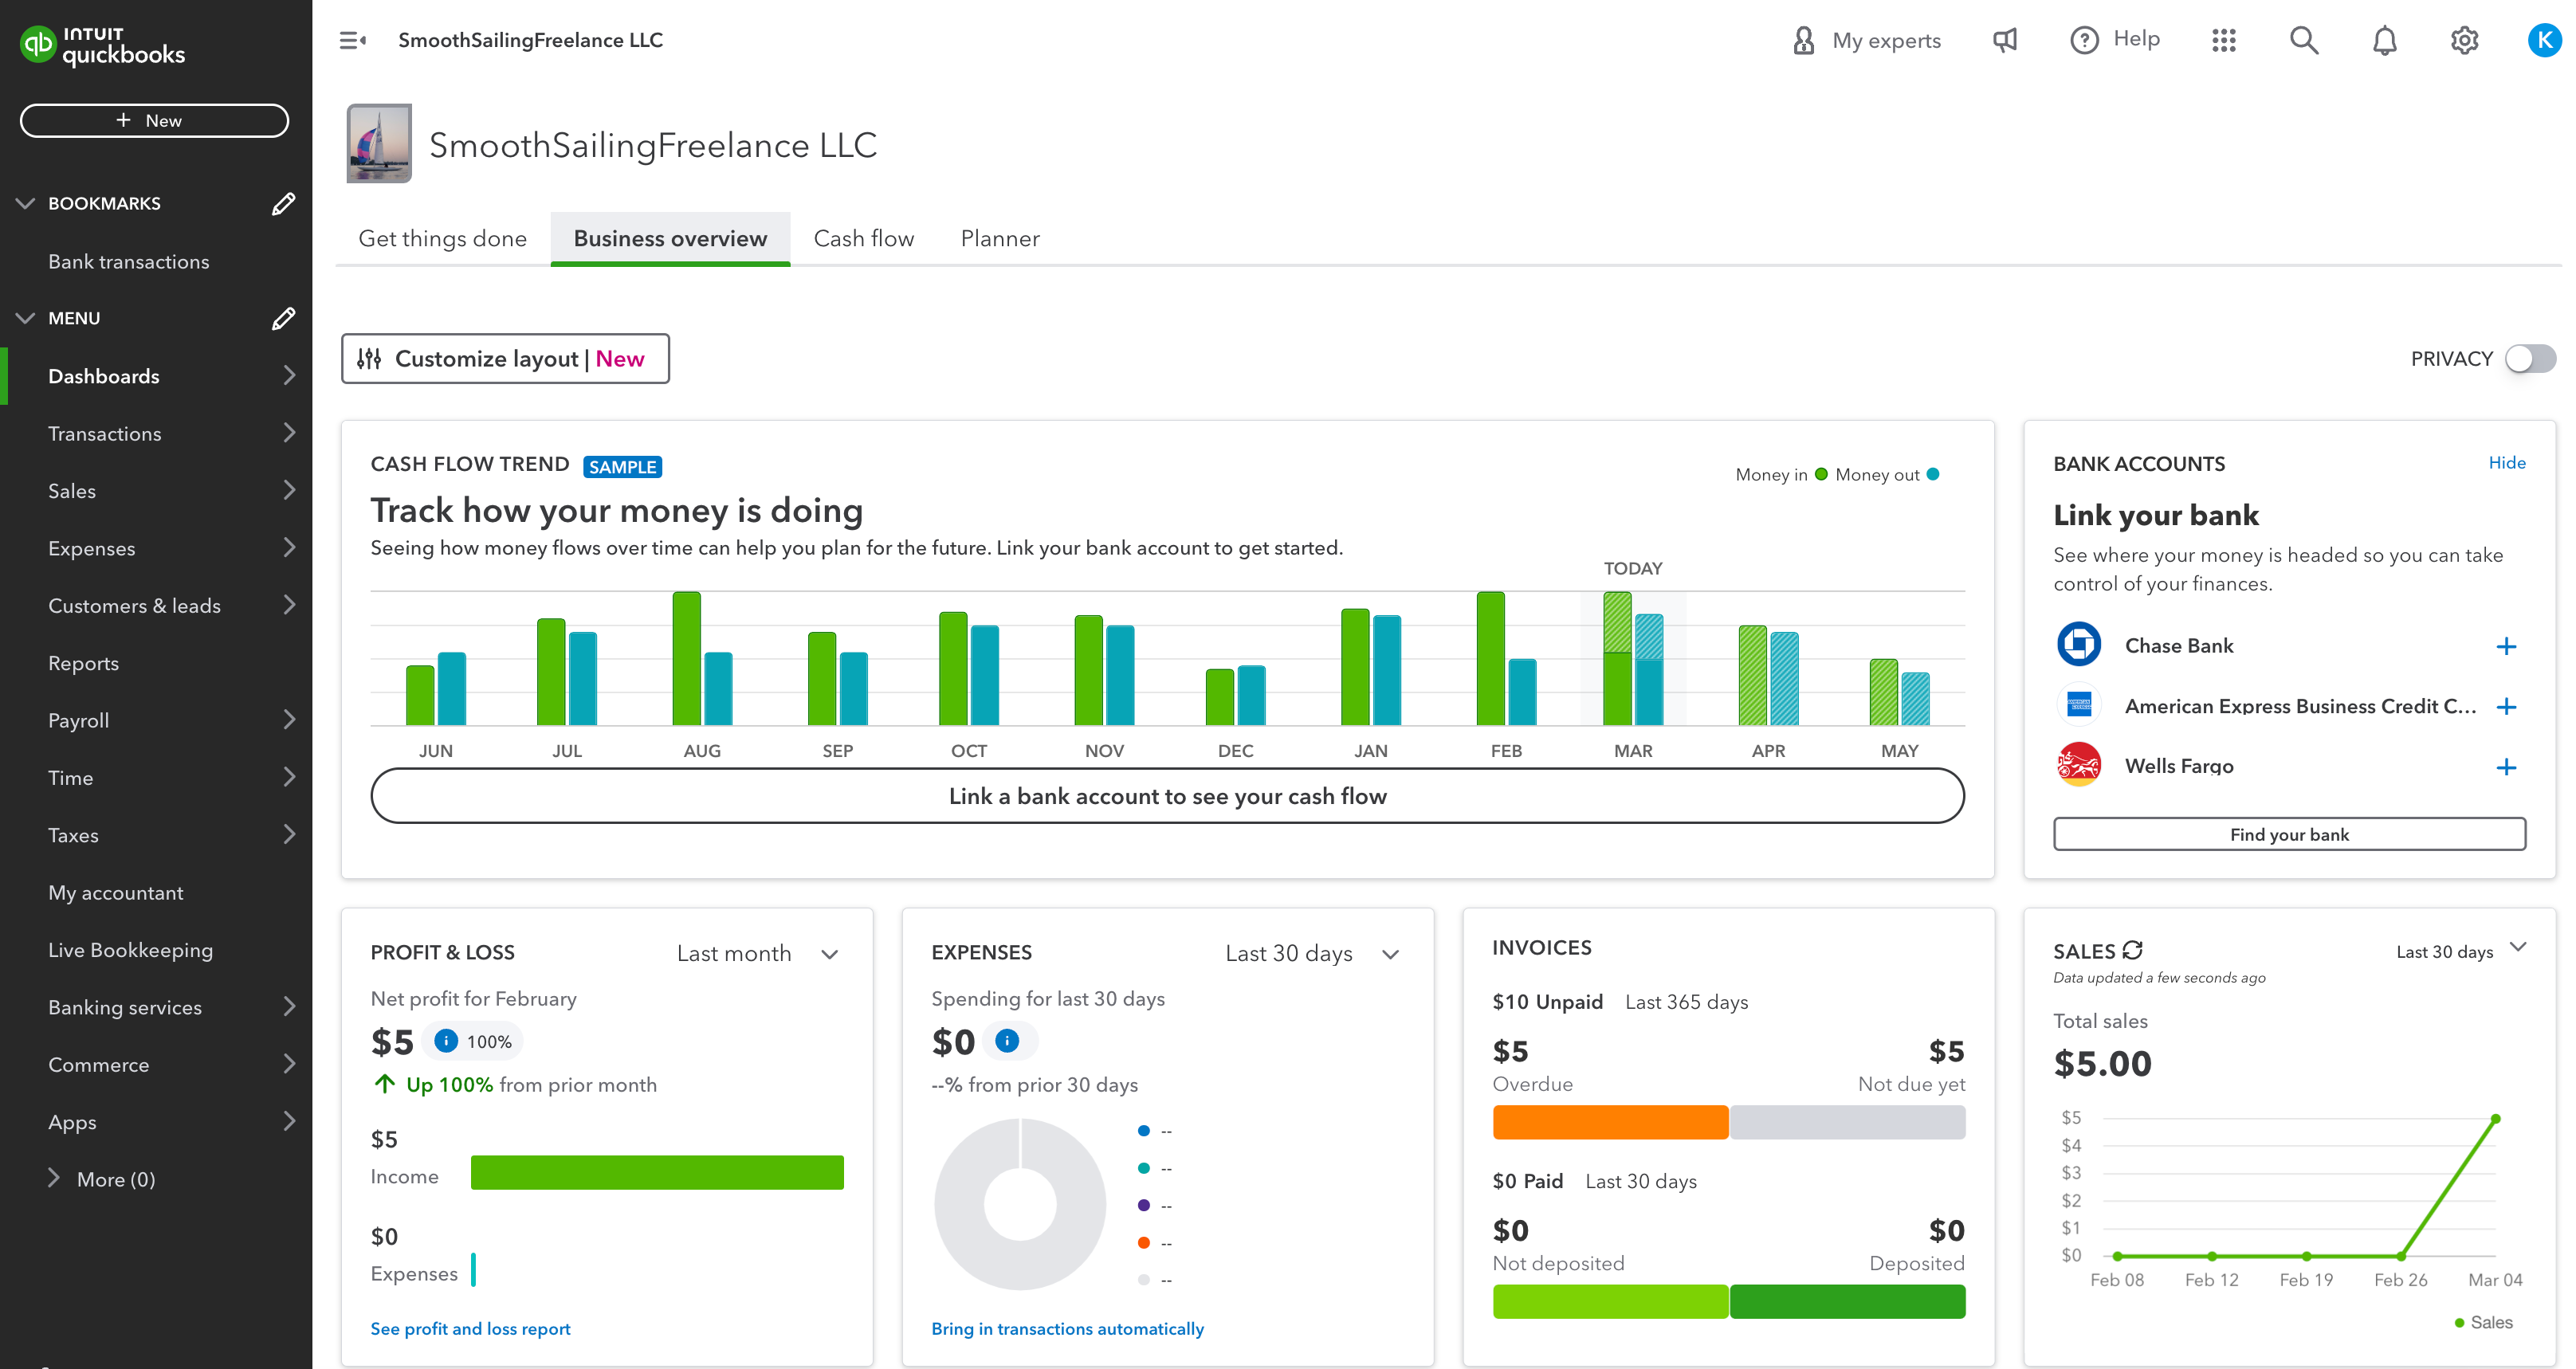 With its clear graphics and intuitive interface, QuickBooks Online's user-friendly dashboard helps first-time non-accountant business owners get a firm grasp of their business's most essential financial data.